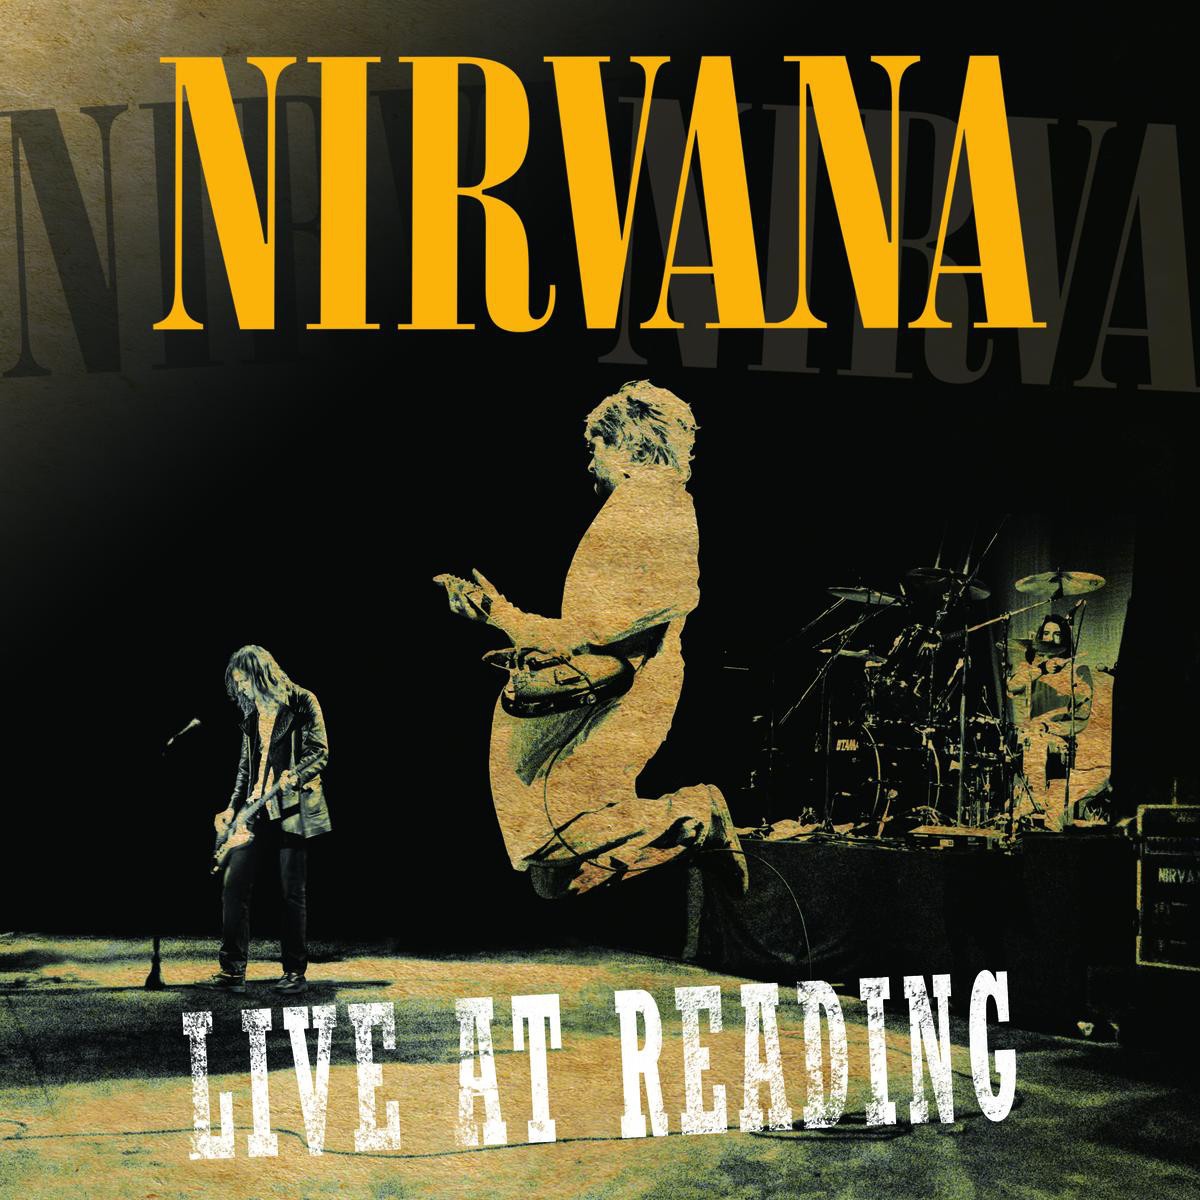 About A Girl (1992/Live at Reading)